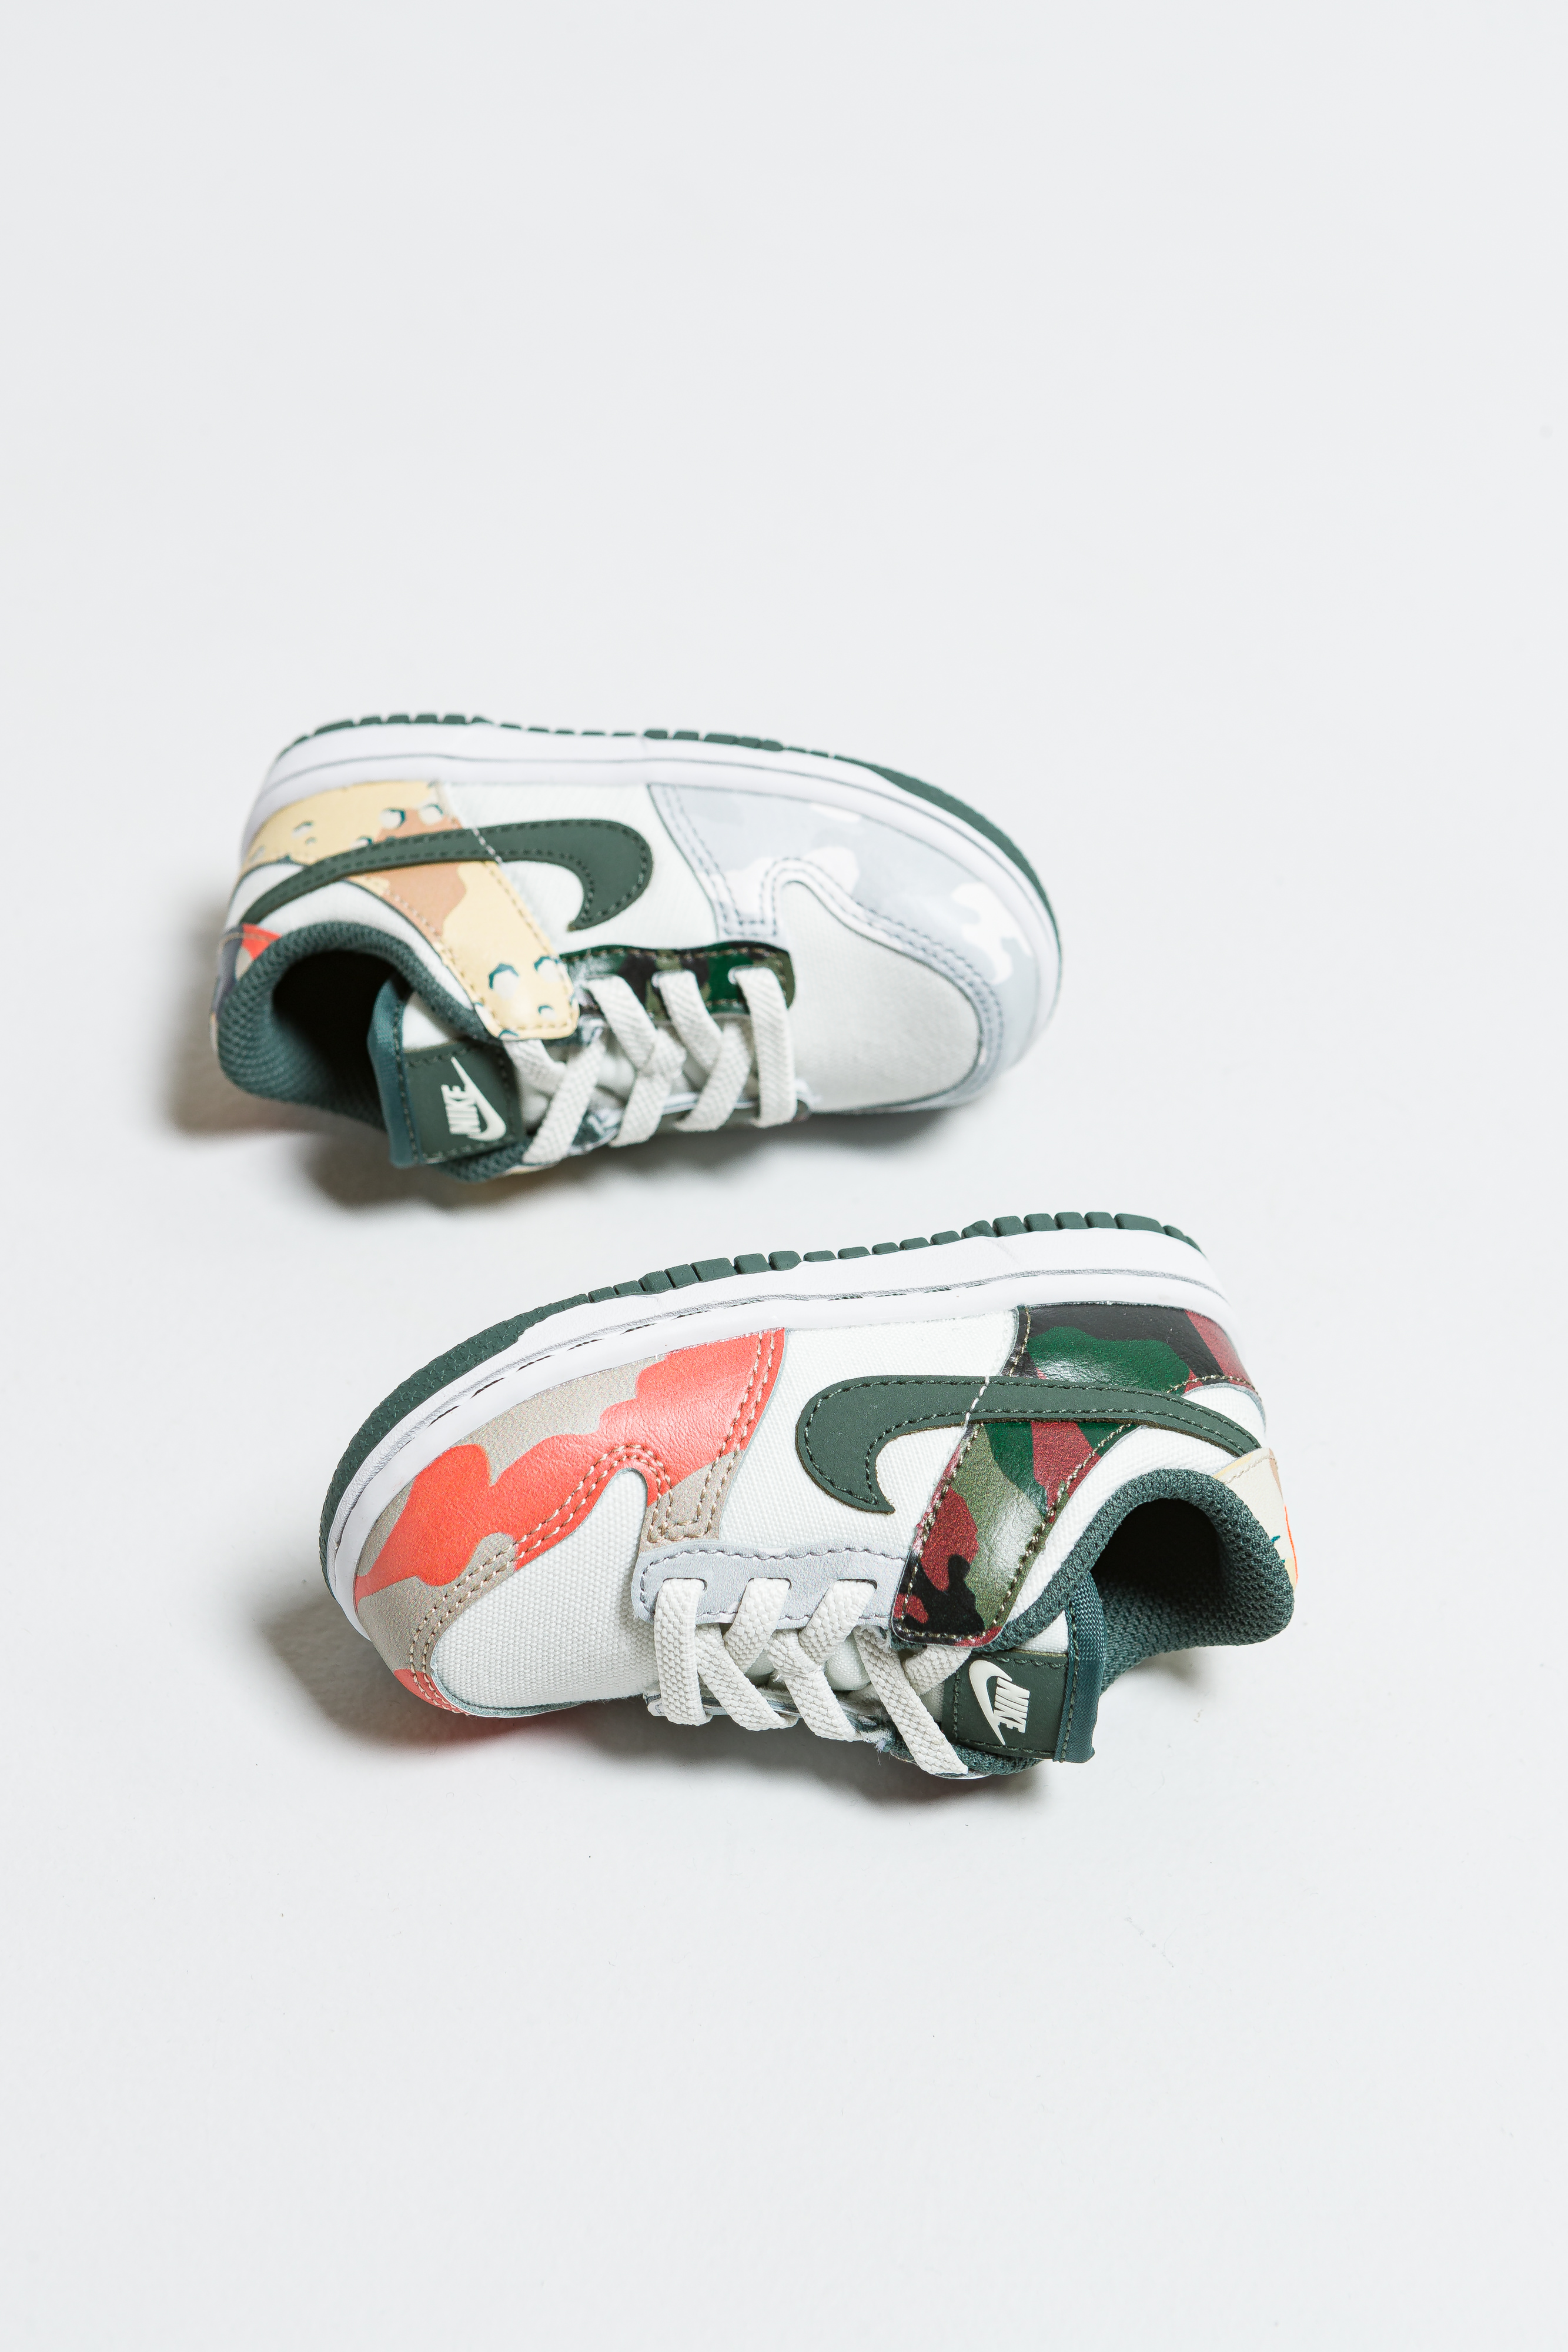 Nike - Dunk Low SE (TDE) - Sail/Vintage Green - Up There